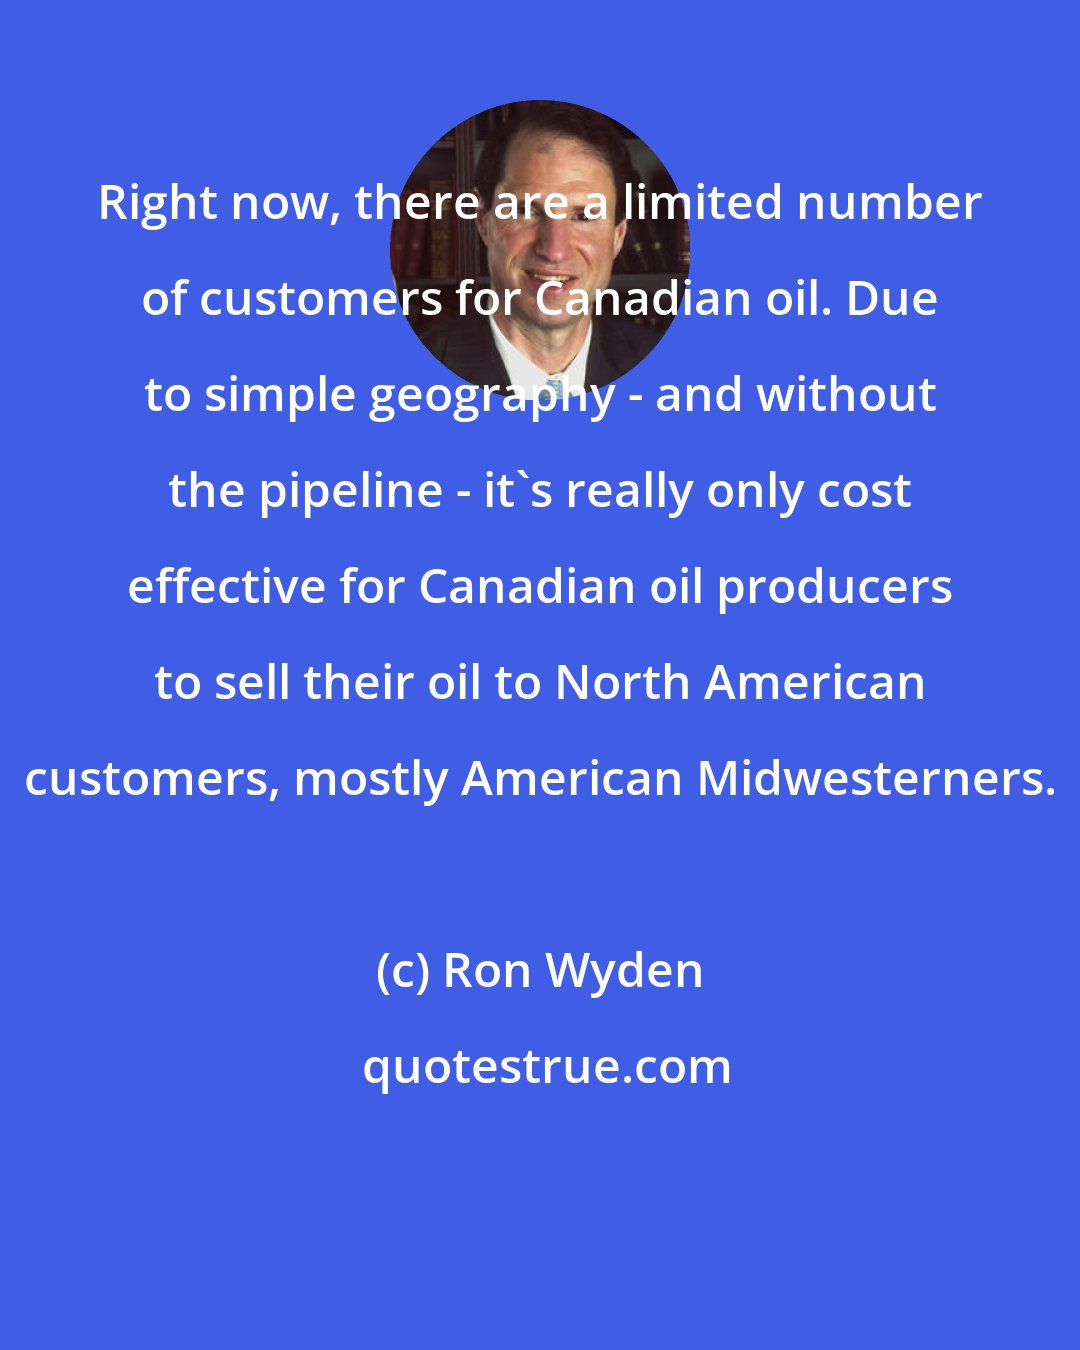 Ron Wyden: Right now, there are a limited number of customers for Canadian oil. Due to simple geography - and without the pipeline - it's really only cost effective for Canadian oil producers to sell their oil to North American customers, mostly American Midwesterners.